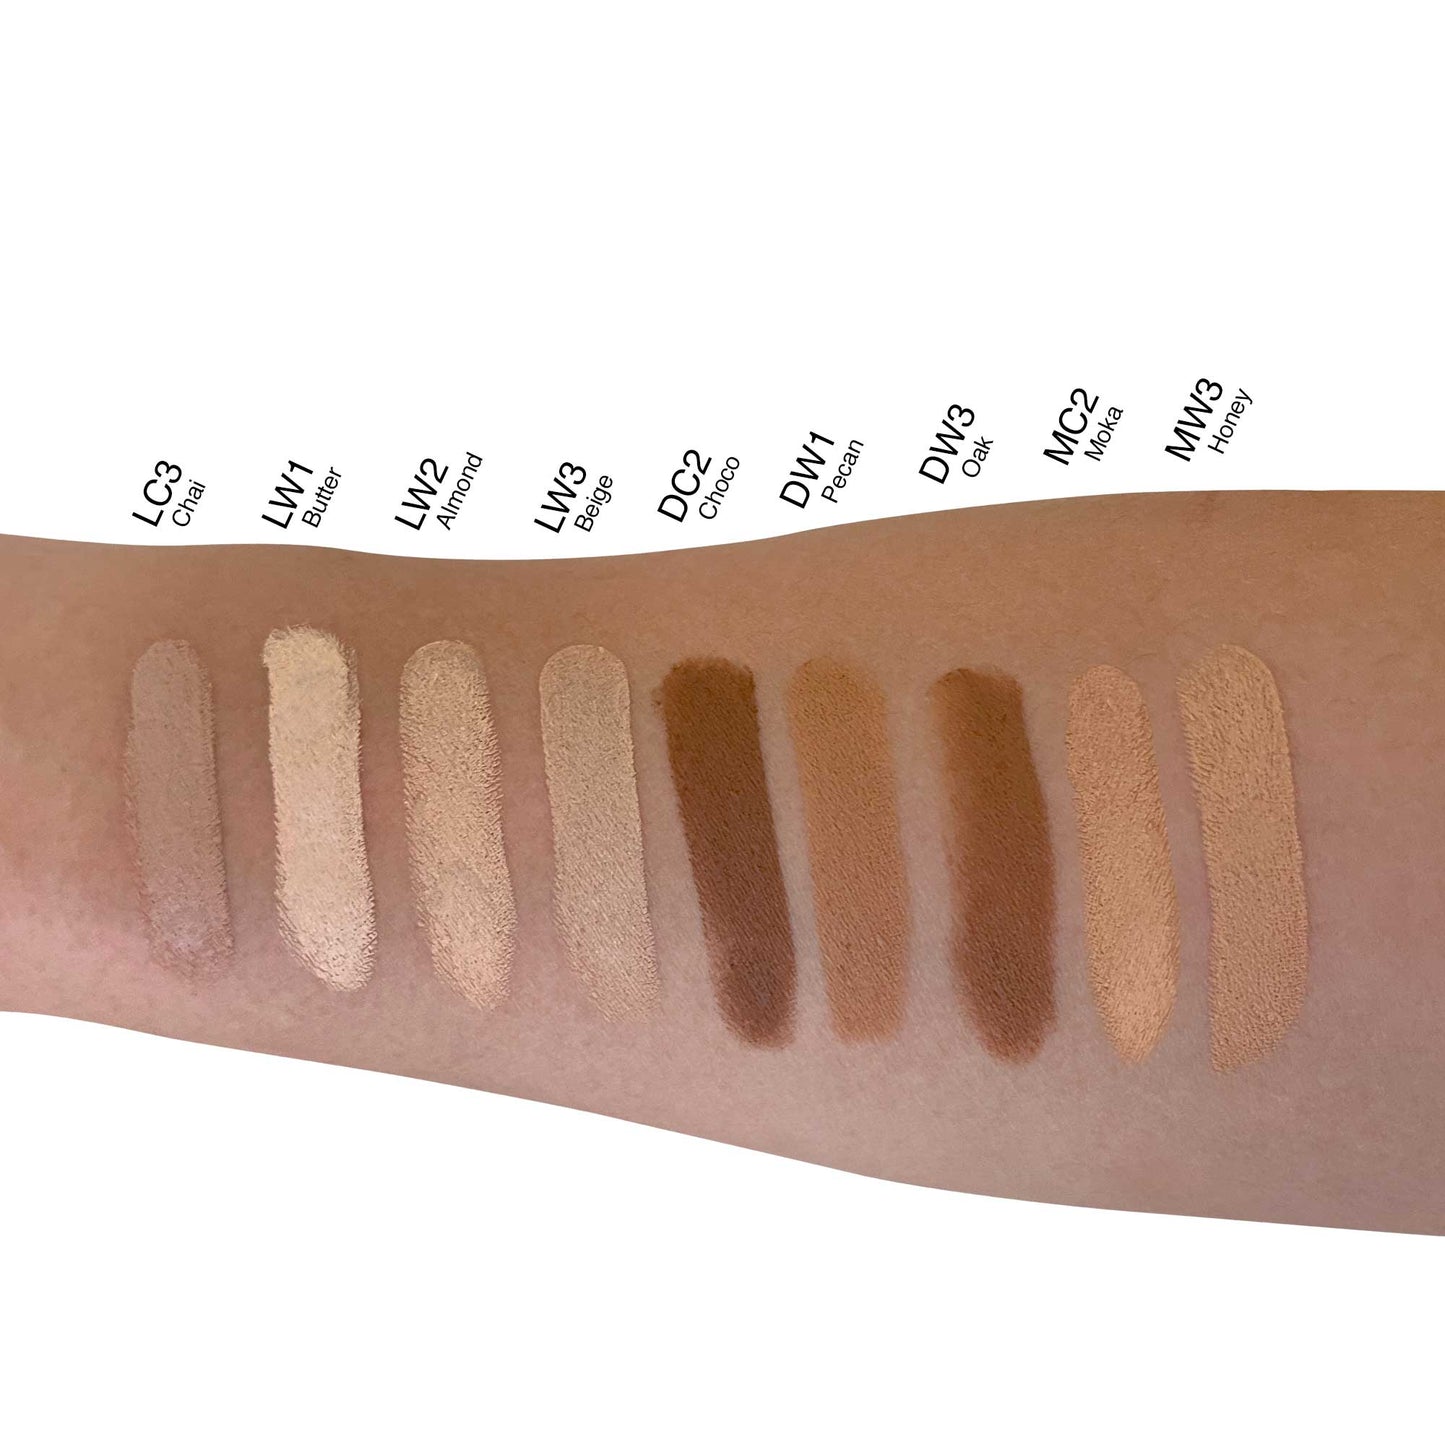 Correct blemishes and dark spots with this easy to use compact Cruisin Organics Pecan Creme Concealer Stick. You can also use darker shades for contouring or lighter shades for highlighting to maximize the use of these multipurpose concealer sticks. Providing medium to full coverage with a matte finish, fit the concealer stick in your makeup bag for on-the-go convenience!